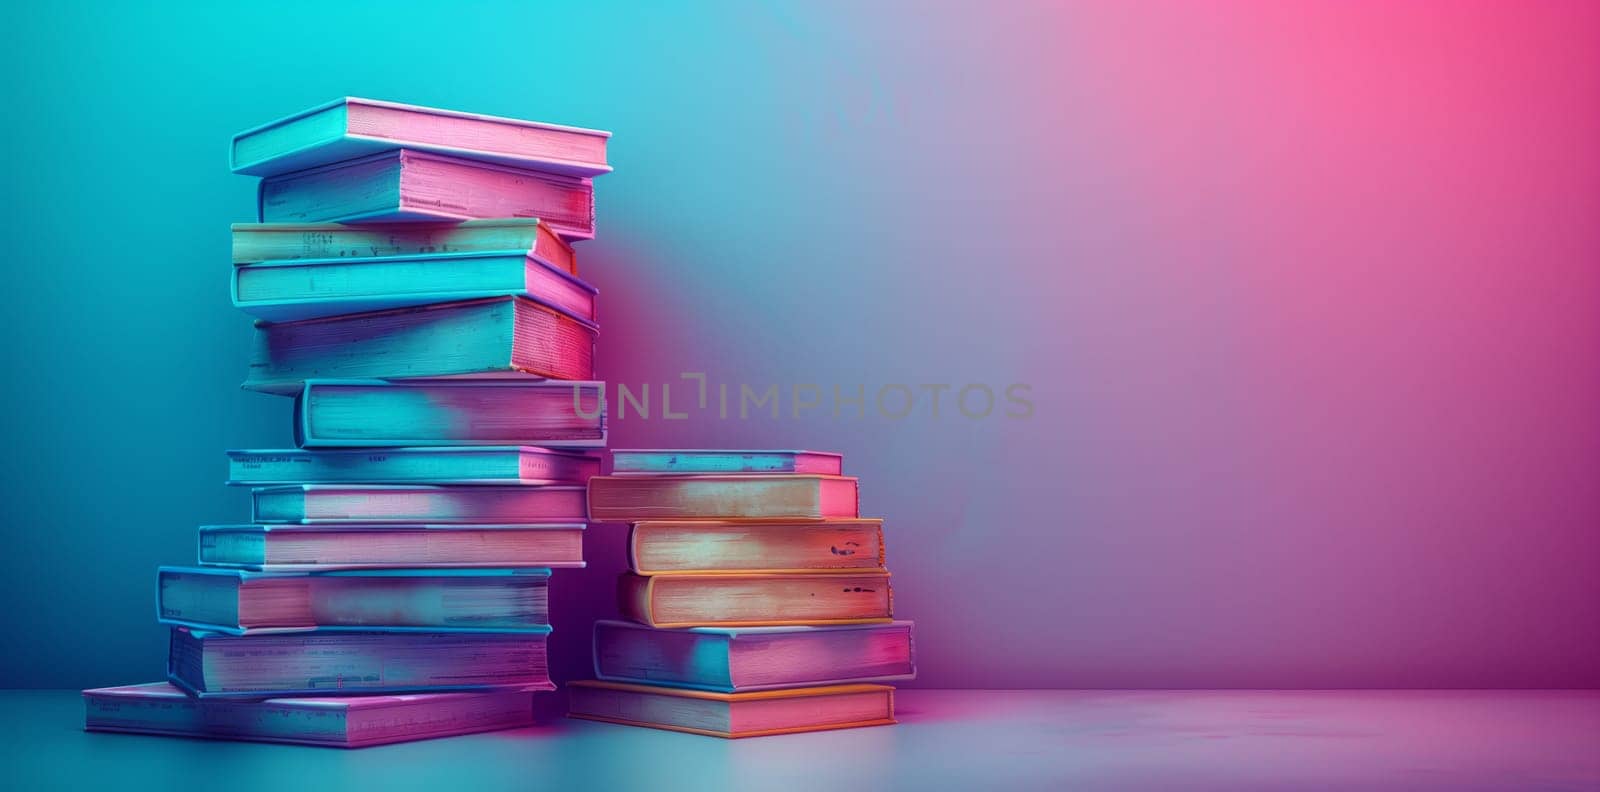 A stack of books in shades of purple, pink, and violet resembling a skyscraper. The electric blue font adds an artistic touch to the rectangular arrangement